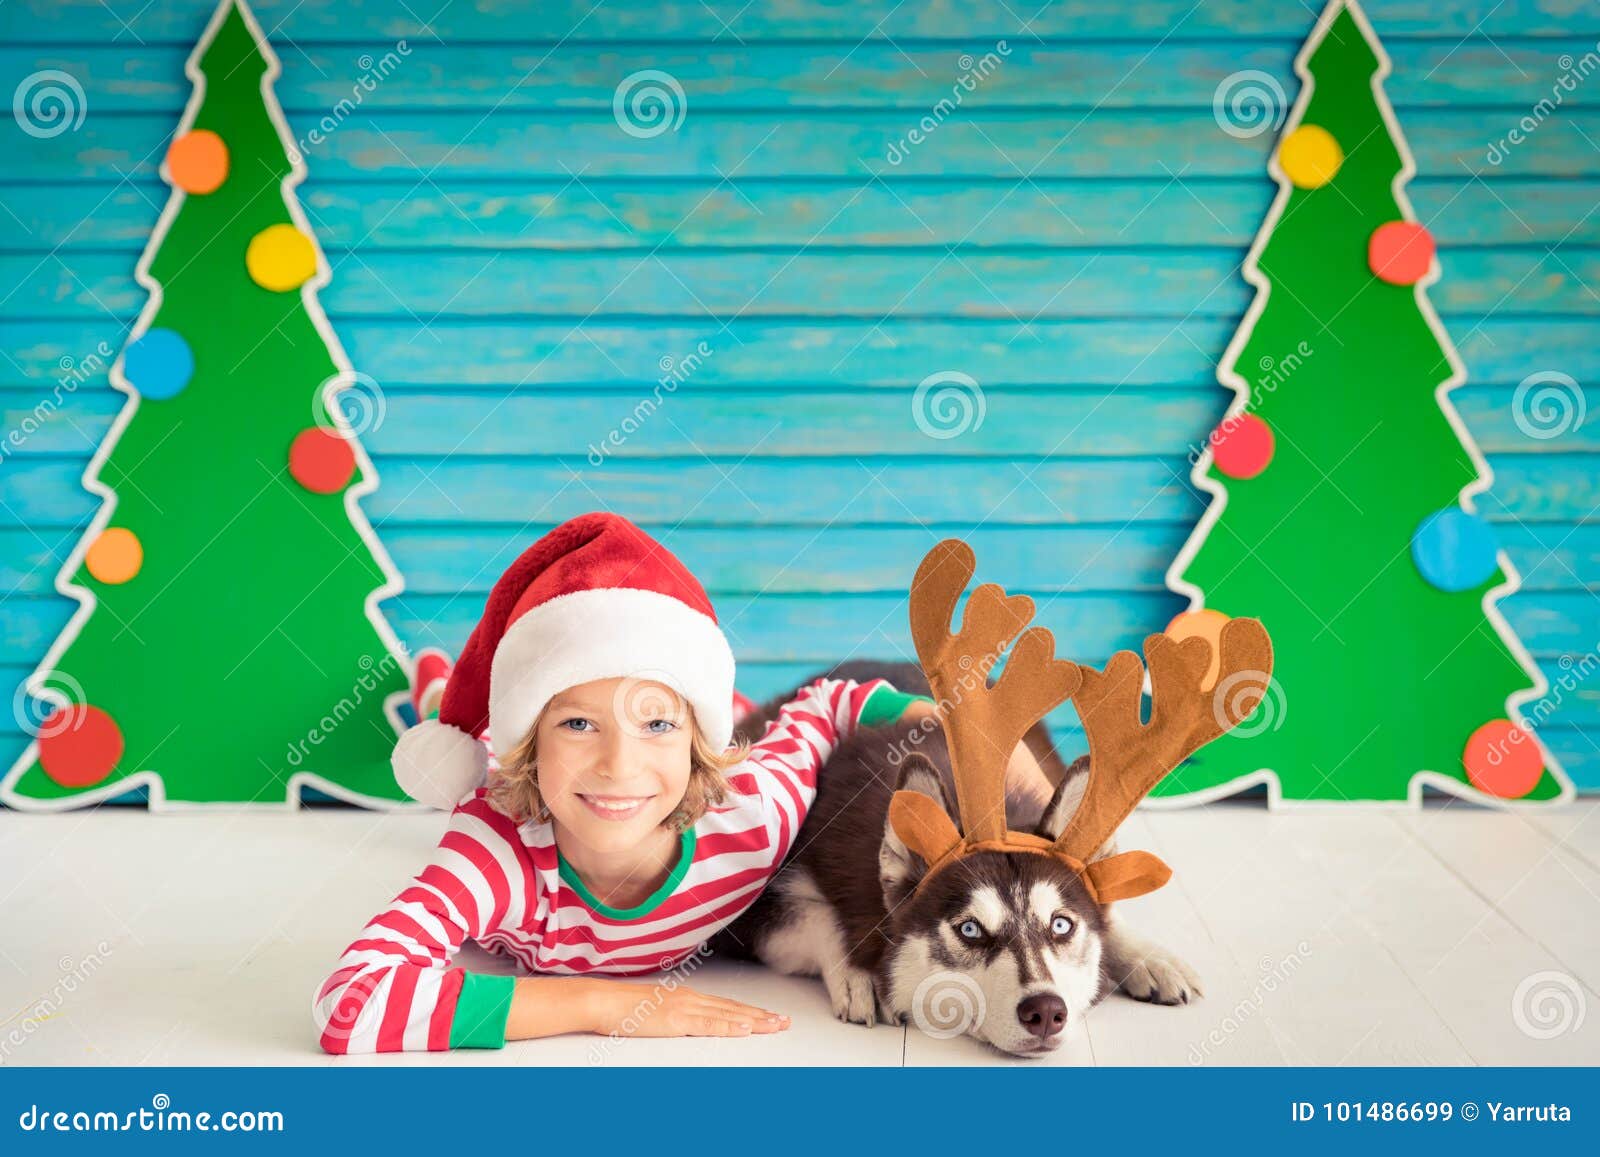 Download Happy Child And Dog Christmas Eve Stock Image Image of animal t